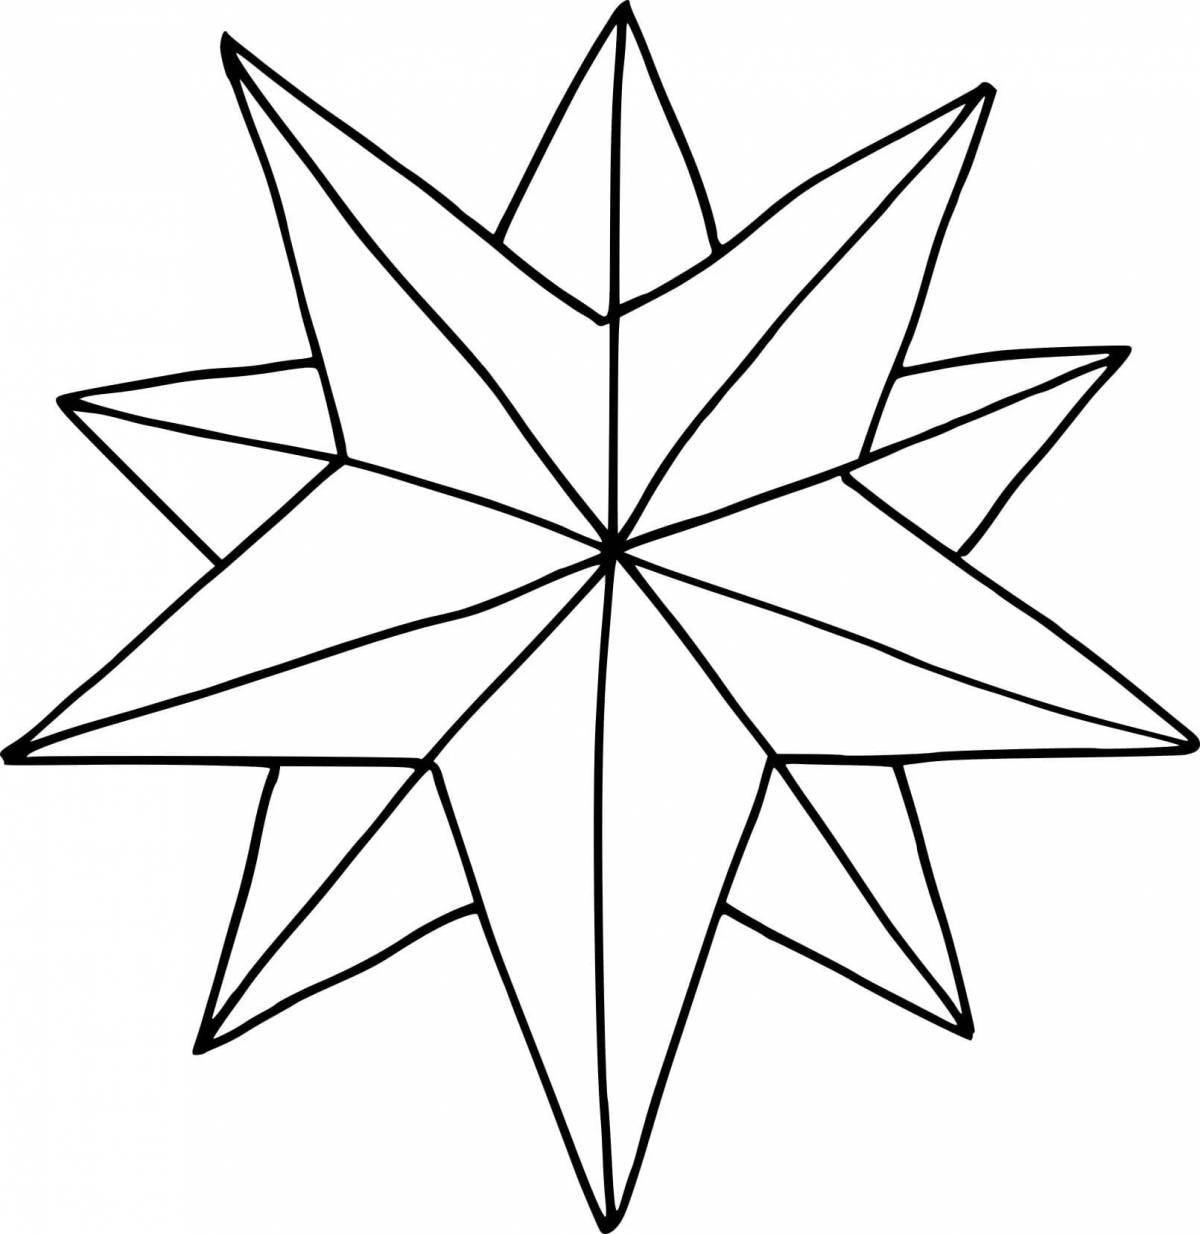 Creative star of bethlehem coloring pages for kids